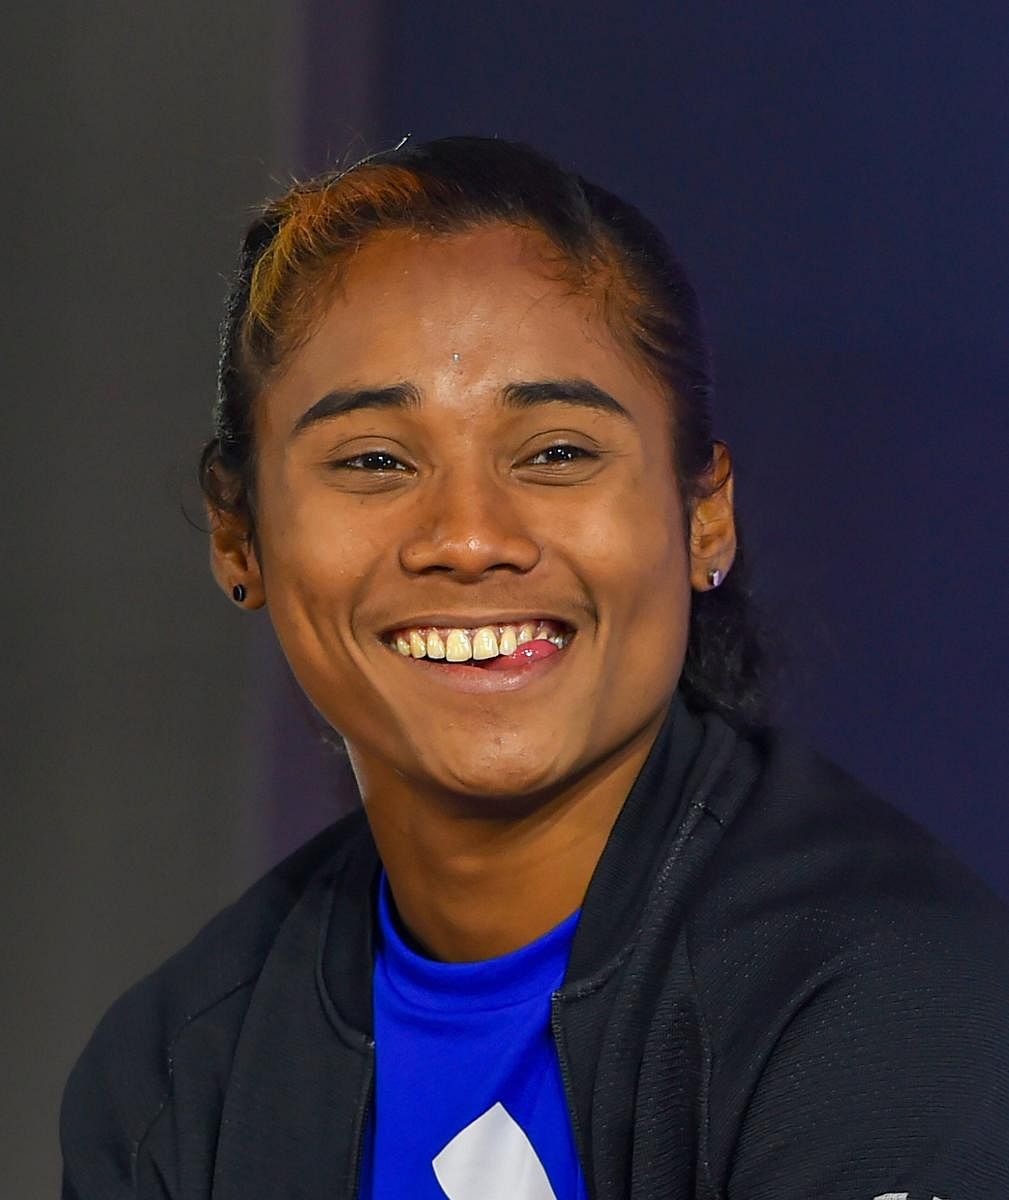 Indian athletics' High-Performance Director Volker Herrmann feels star sprinter Hima Das is nearing her best, having won five successive gold medals in three weeks in Europe. (PTI File Photo)